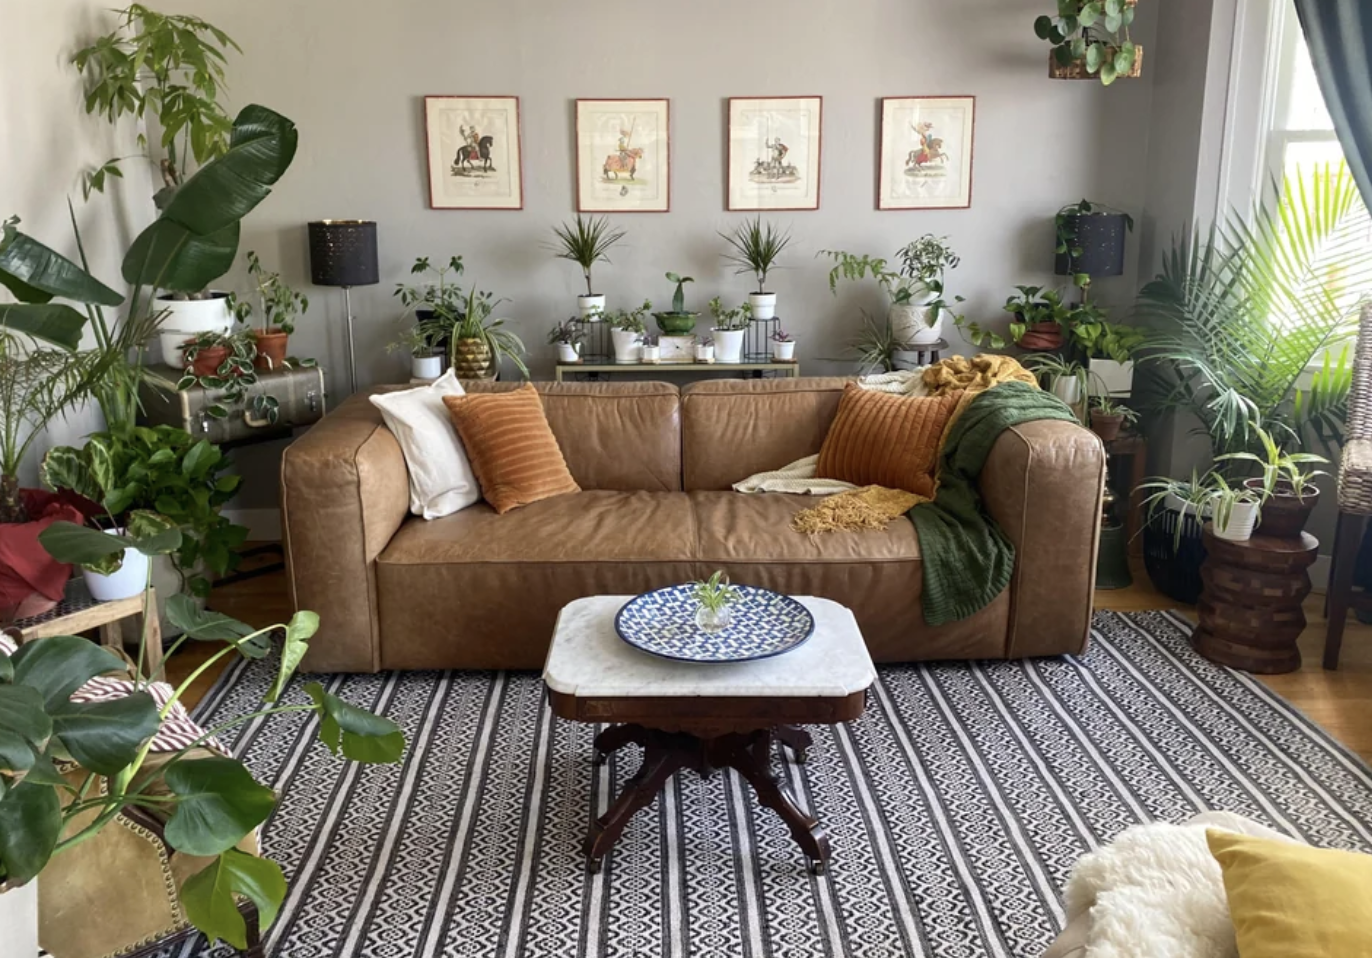 This living room is filled with plants, a statement carpet, and a beautiful brown couch